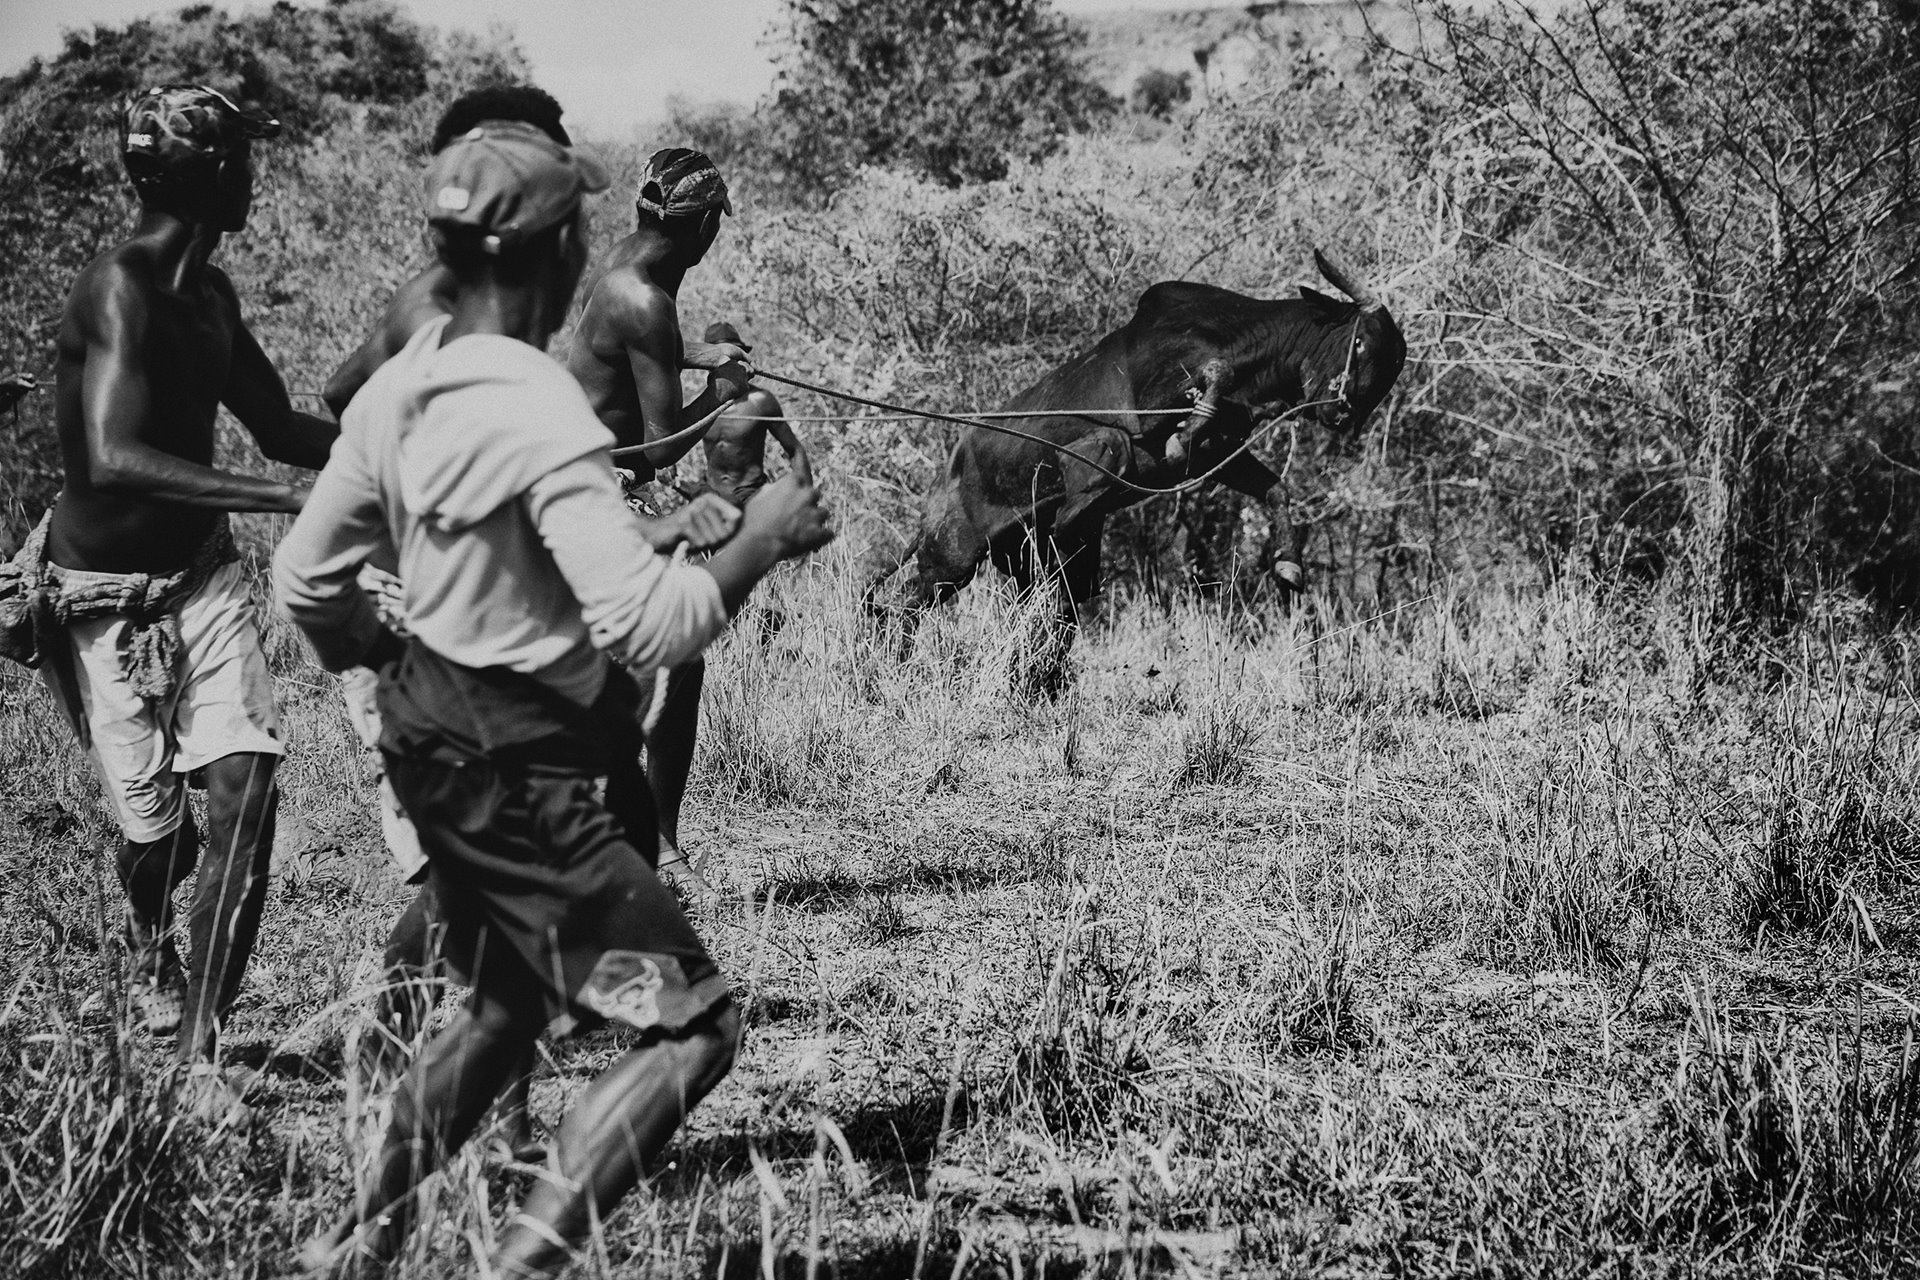 <p>Herdsmen catch a wild zebu, in order to tame and later sell it, near the village of Antsalova, Madagascar. After spending time with the herd, the animal will be taken to a large zebu market in Tsiroanomandidy, around ten days&rsquo; walk away, where it can be expected to raise around two million ariary (US$ 490).</p>
